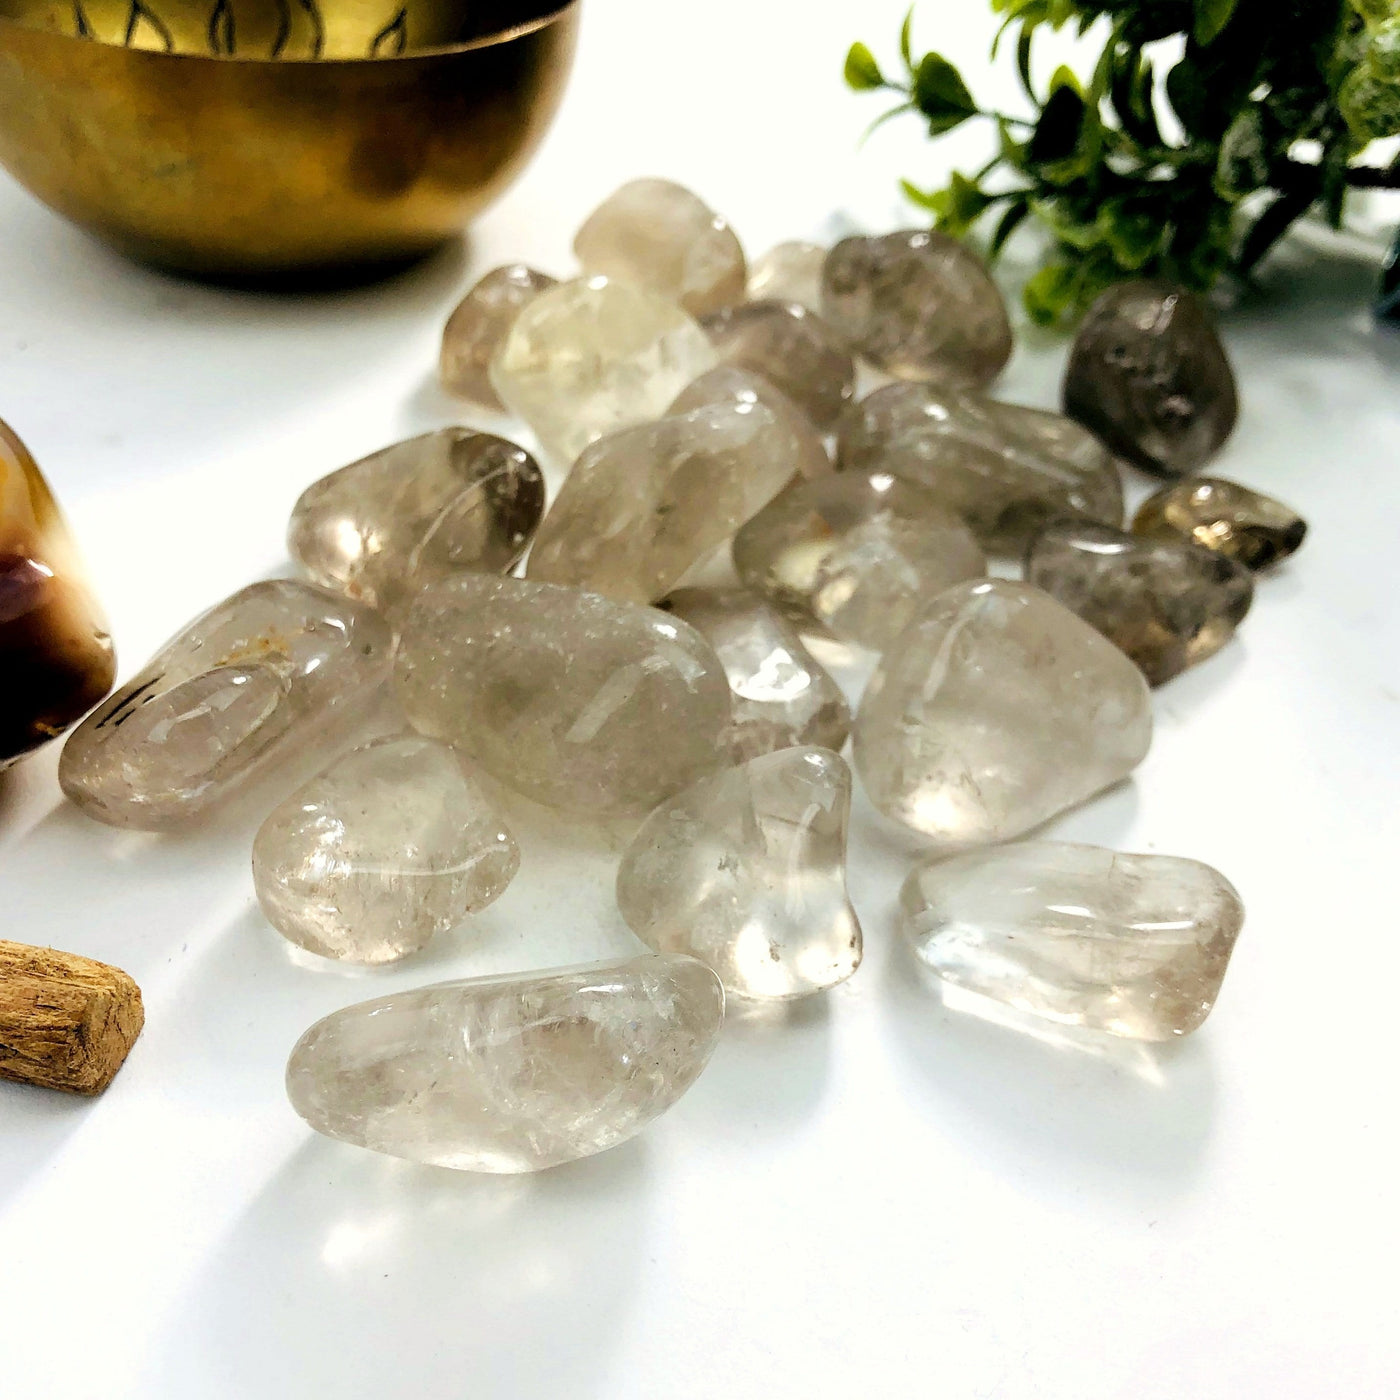 Smokey Quartz Tumbled Gemstones in a pile, light brown in color